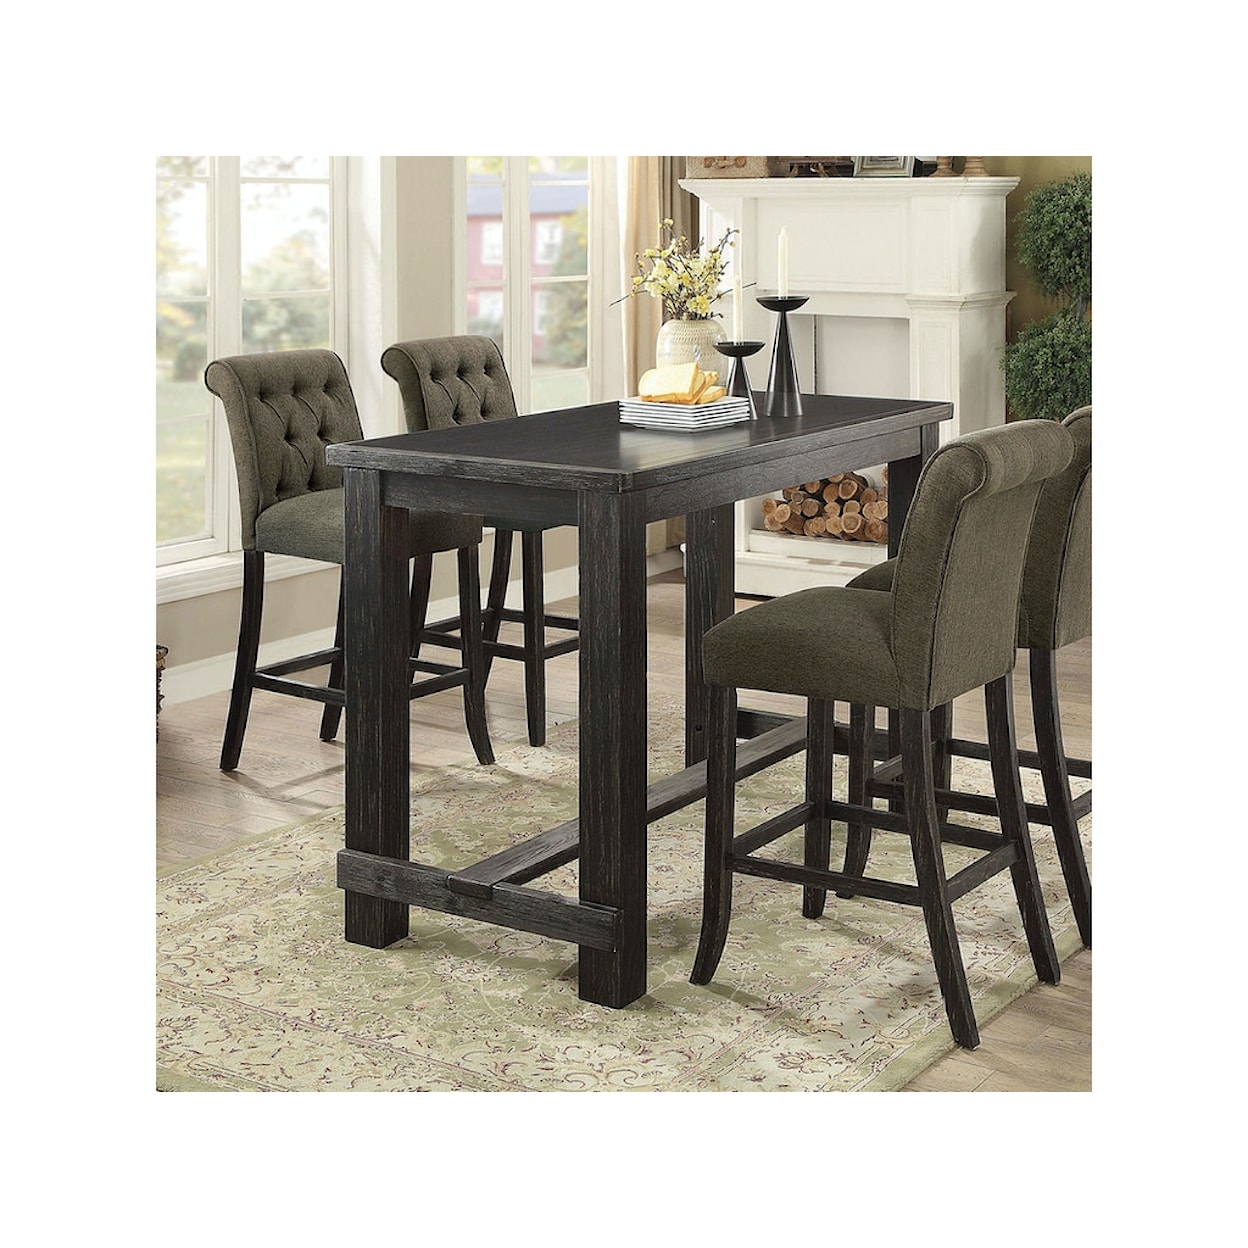 Furniture of America Sania III 5-Piece Bar Table and Chair Set